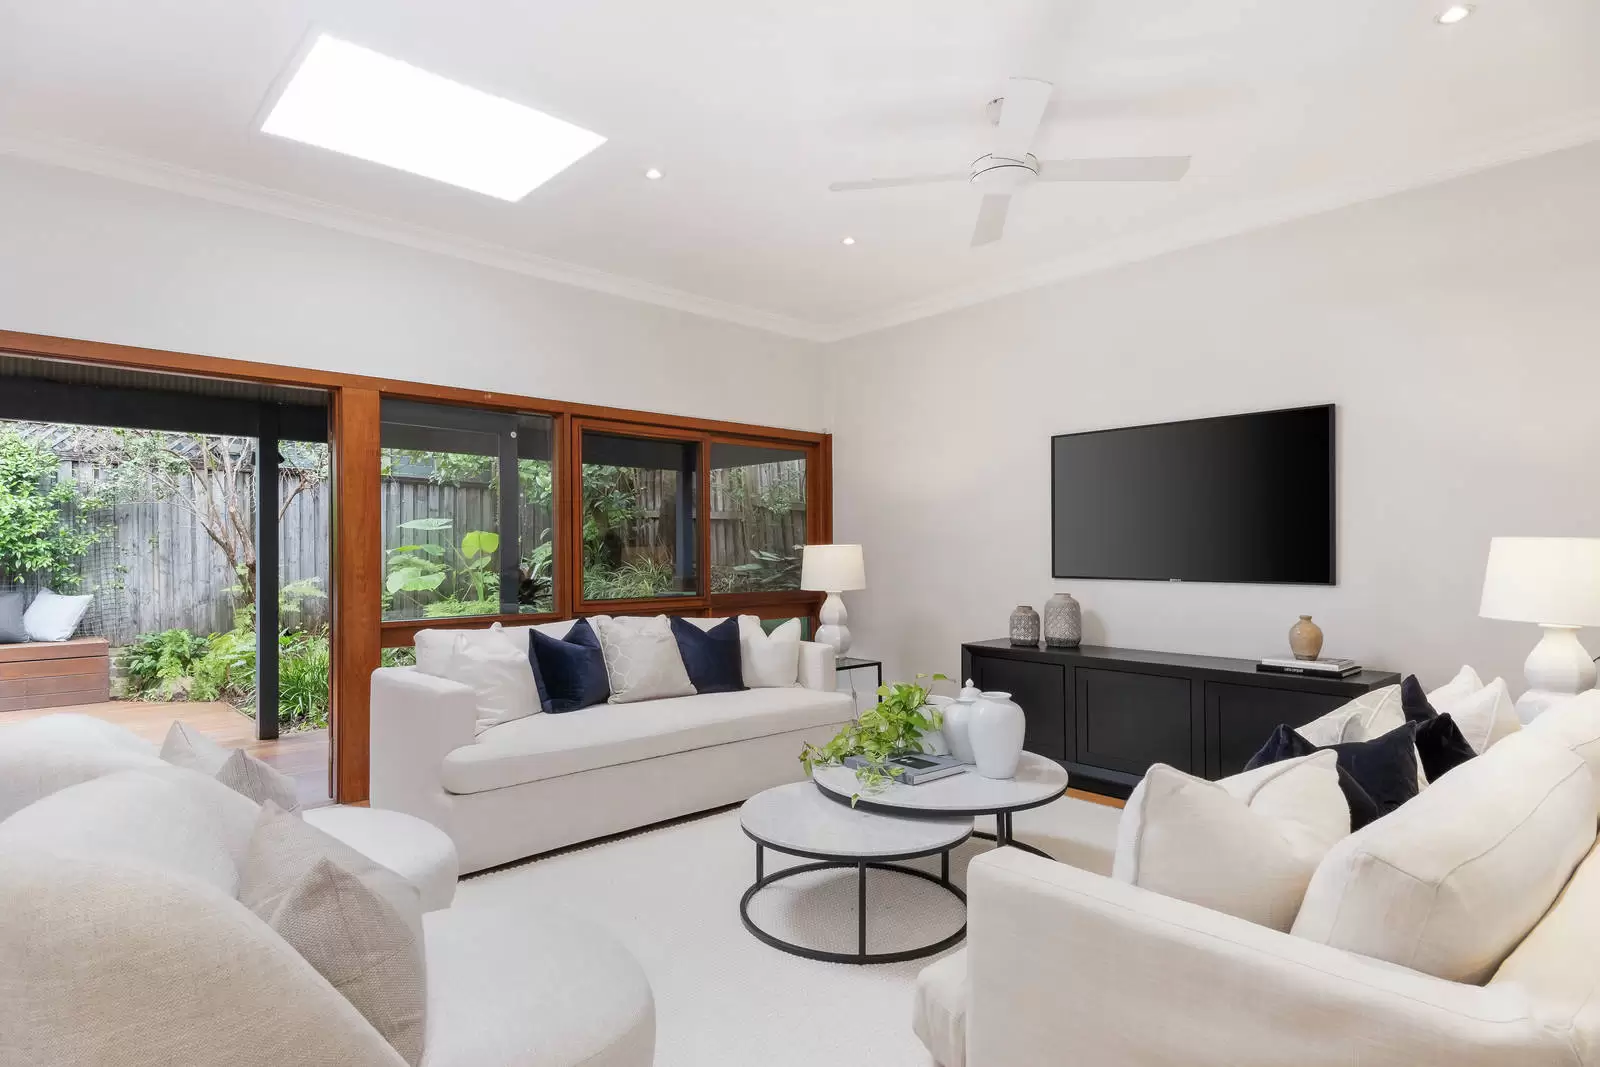 2 Warrah Street, Chatswood Auction by Sydney Sotheby's International Realty - image 1